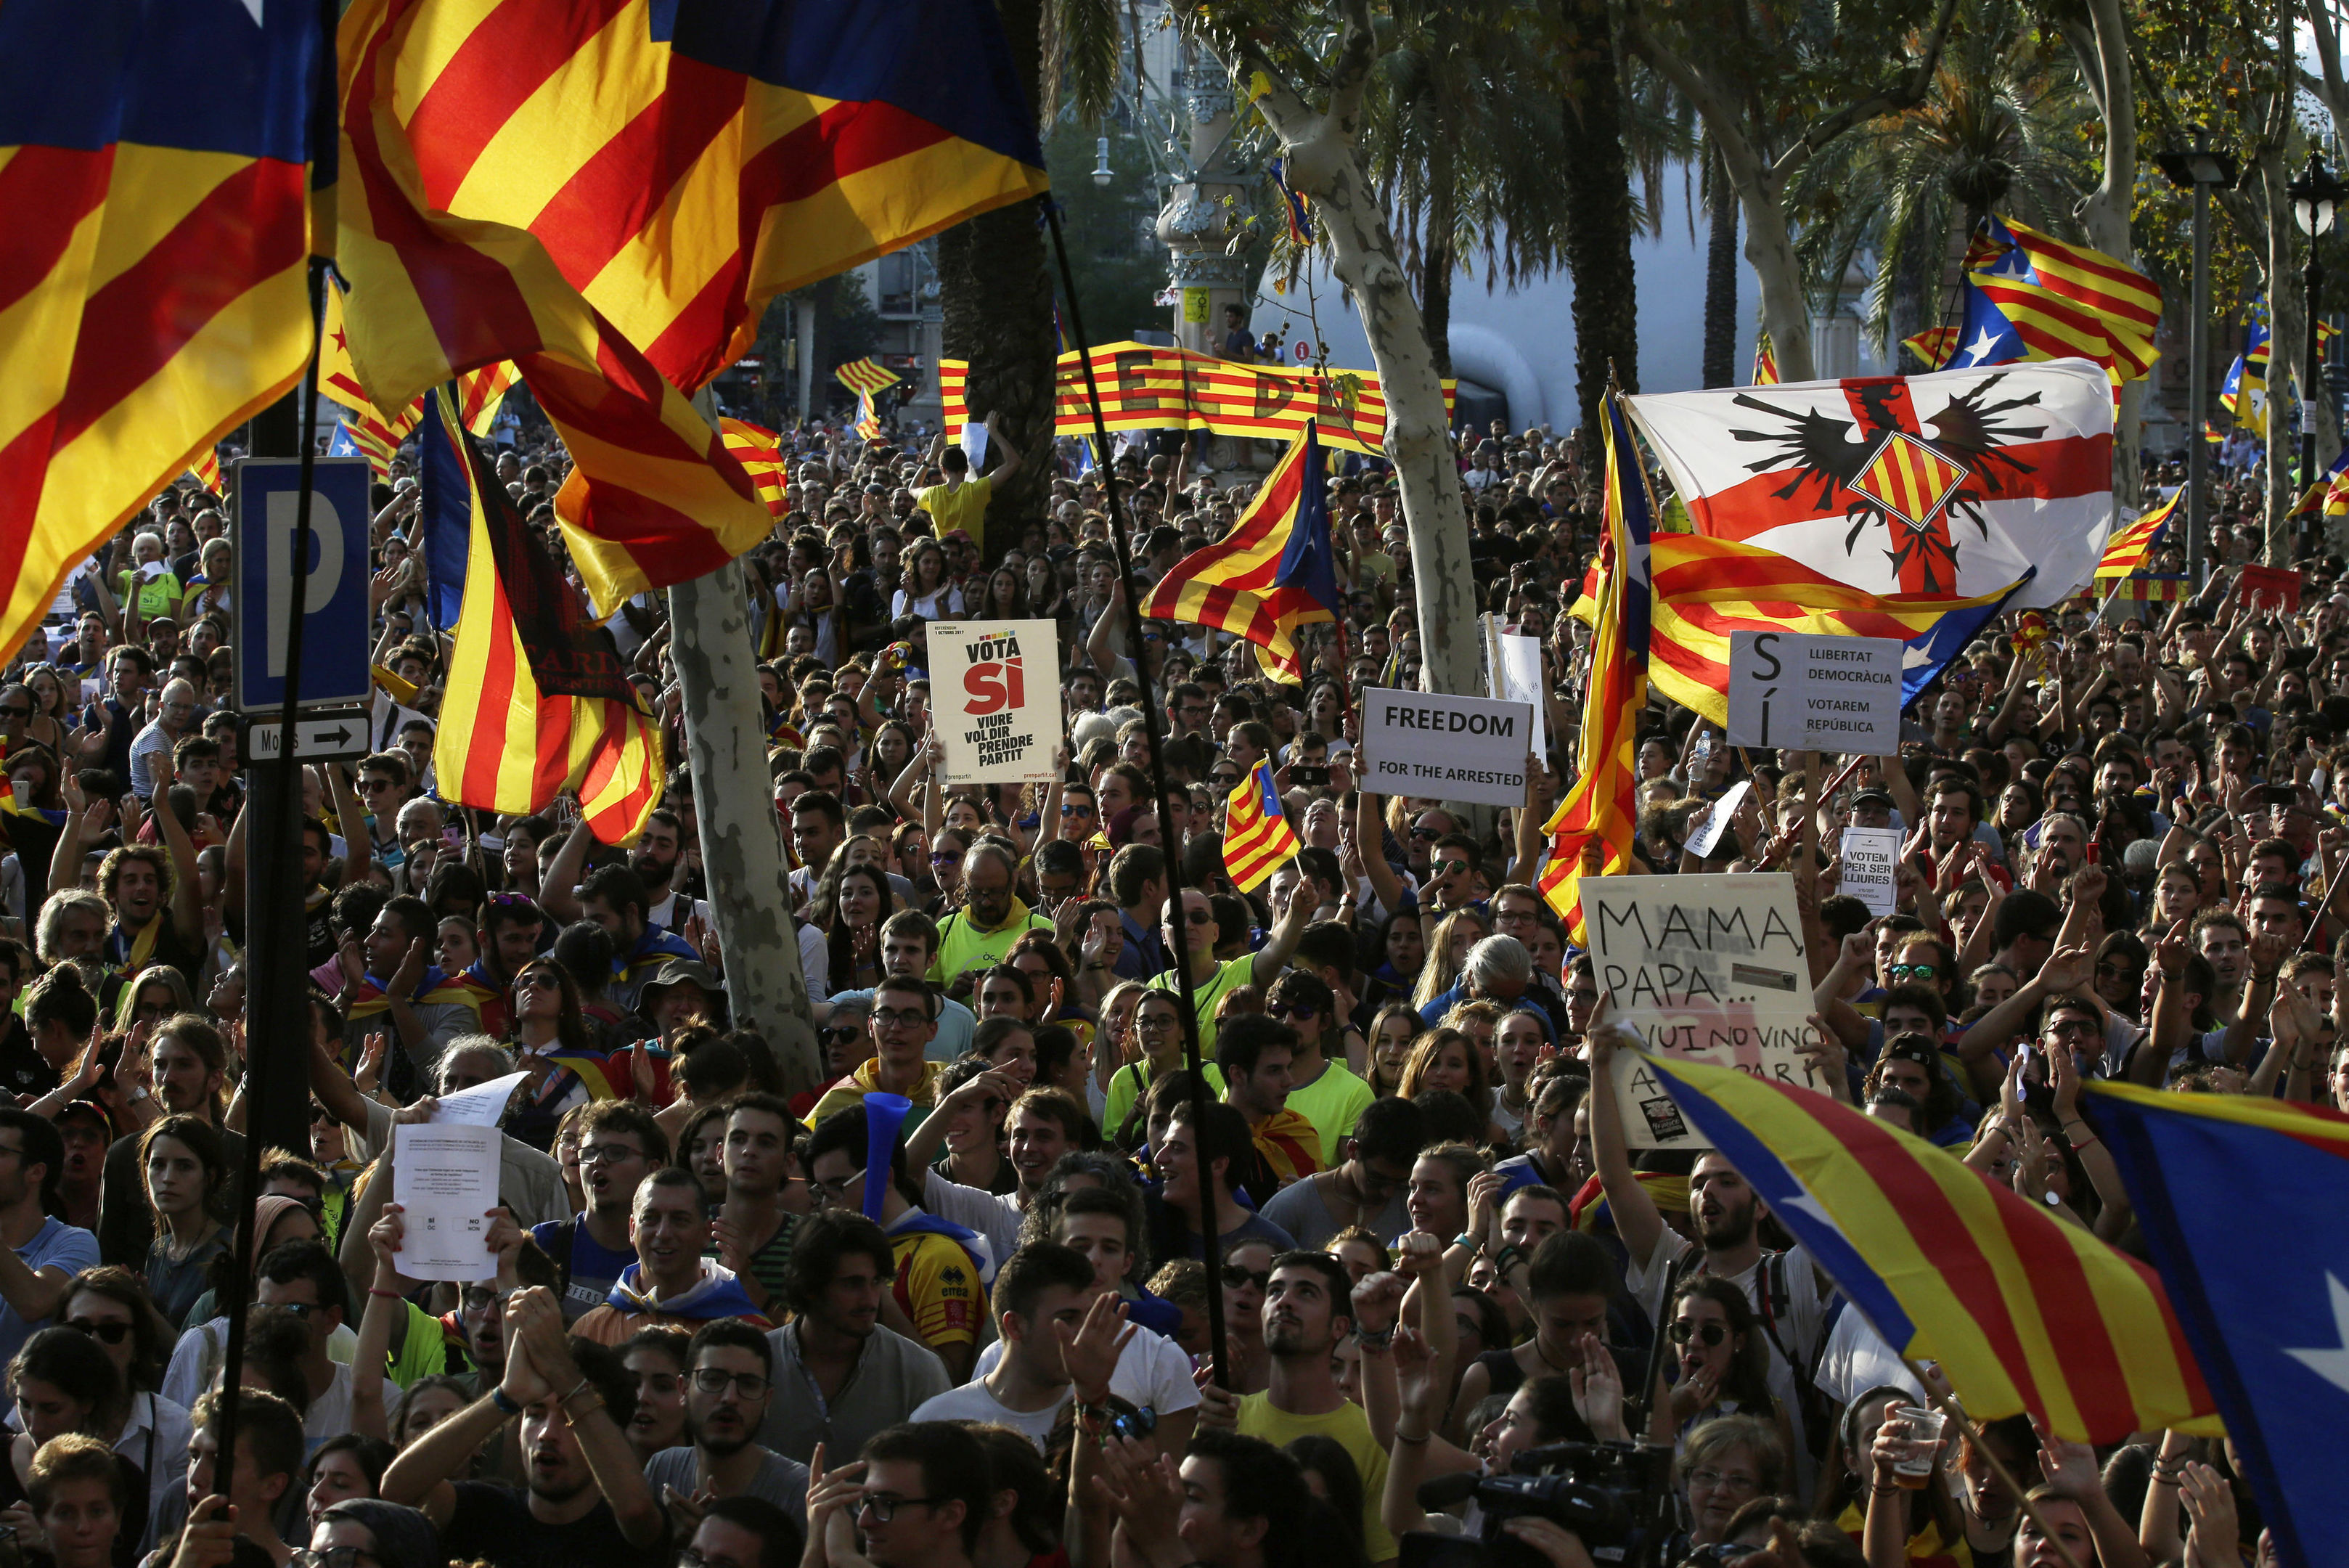 People shout slogans during a protest in Barcelona.